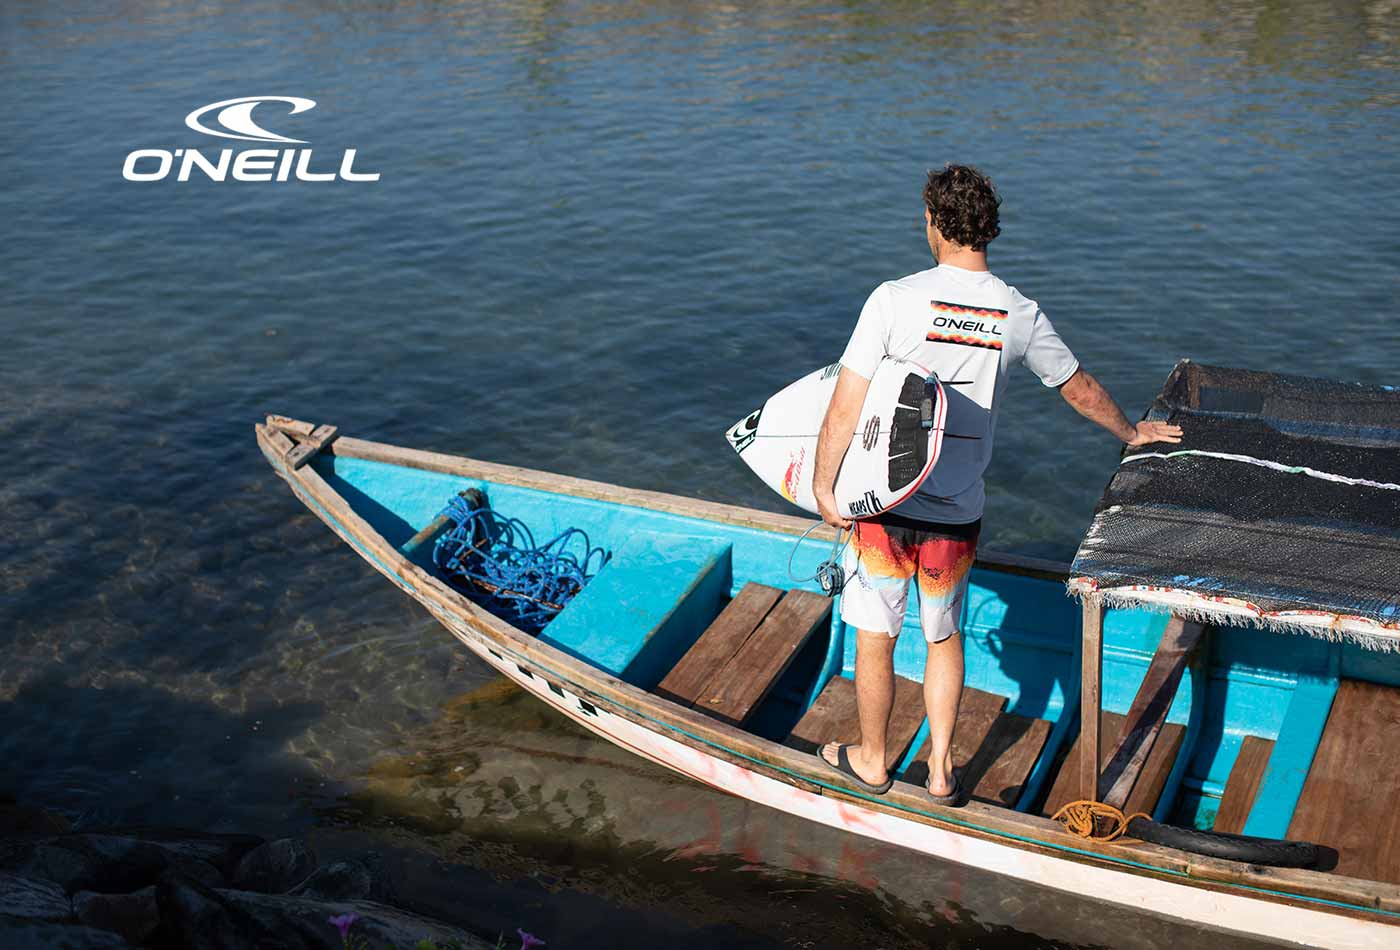 The O'Neill TRVLR Hybrid Series protects against UV exposure and board rash with casual in-and-out of the water versatility. Our Heathered HyperDry fabric has a softand comfortable feeling for all day use. Jordy special edition shirt.